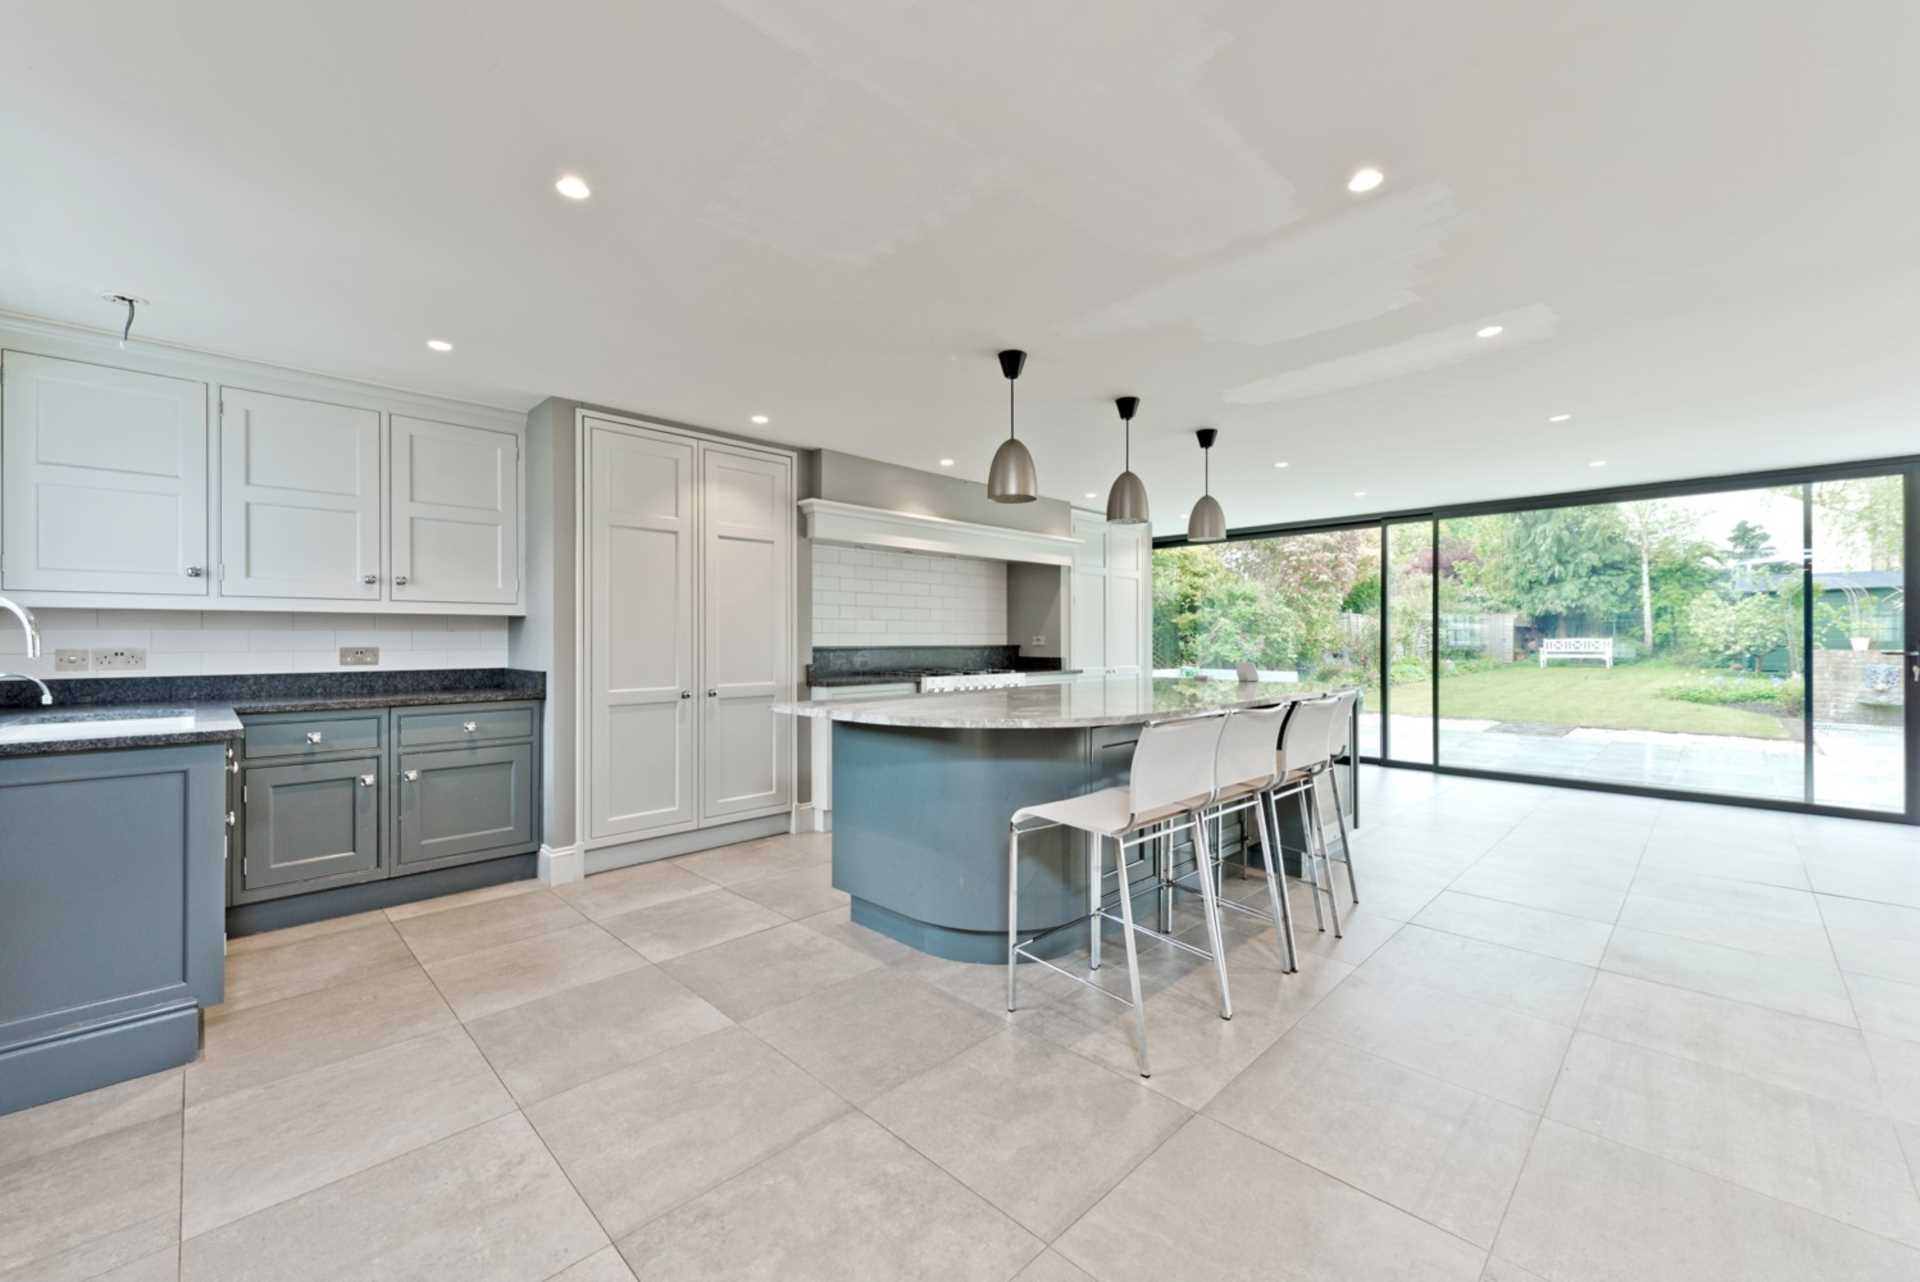 Thorkhill Road, Thames Ditton, Image 3